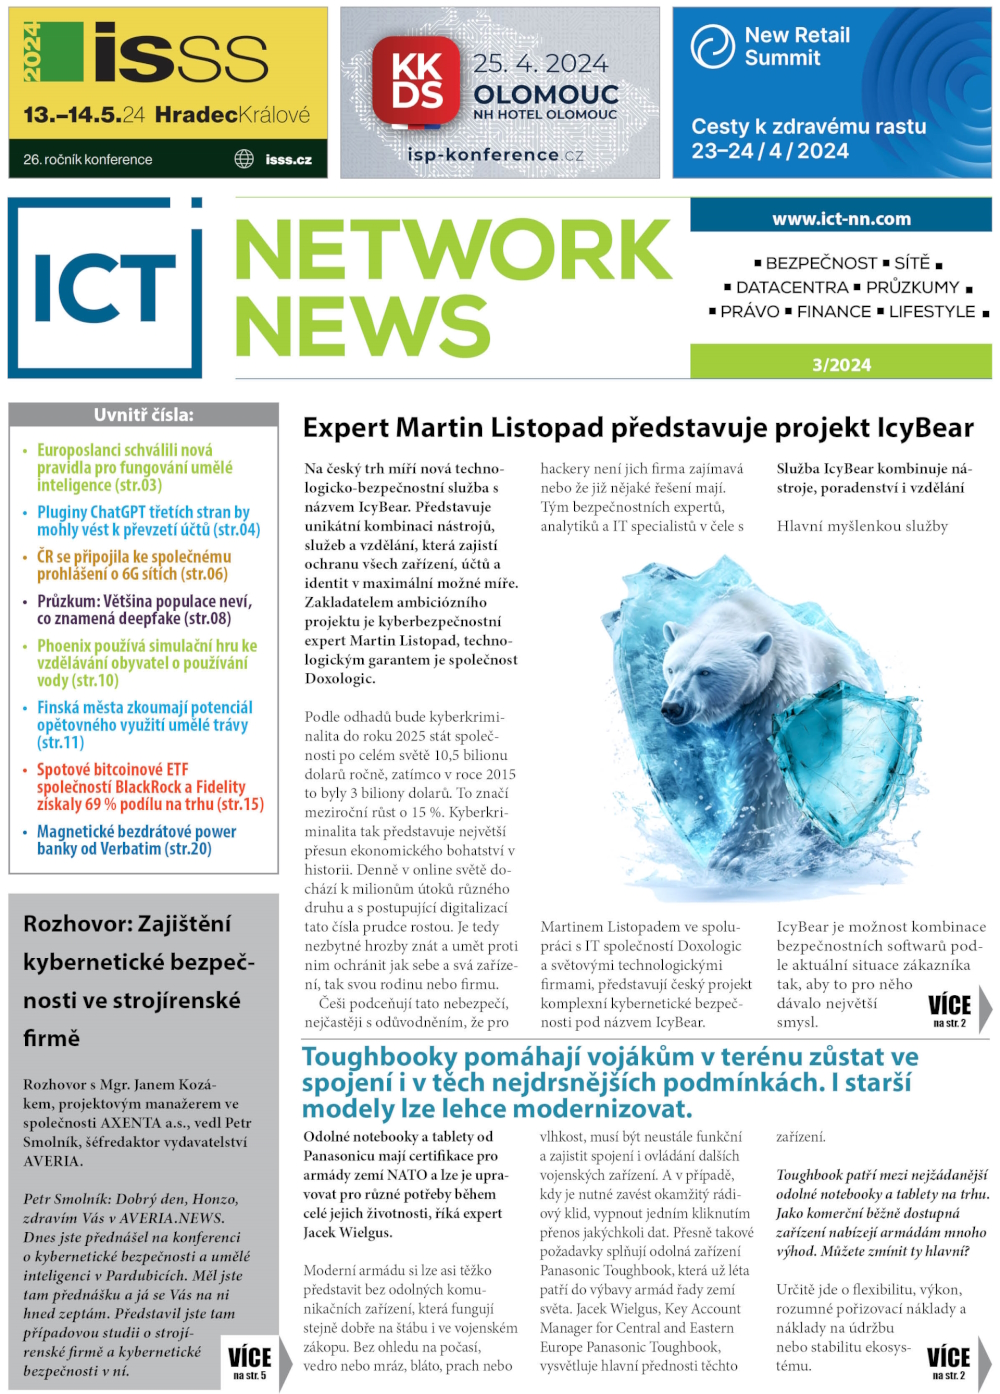 ICT NETWORK NEWS 3-2024 cover